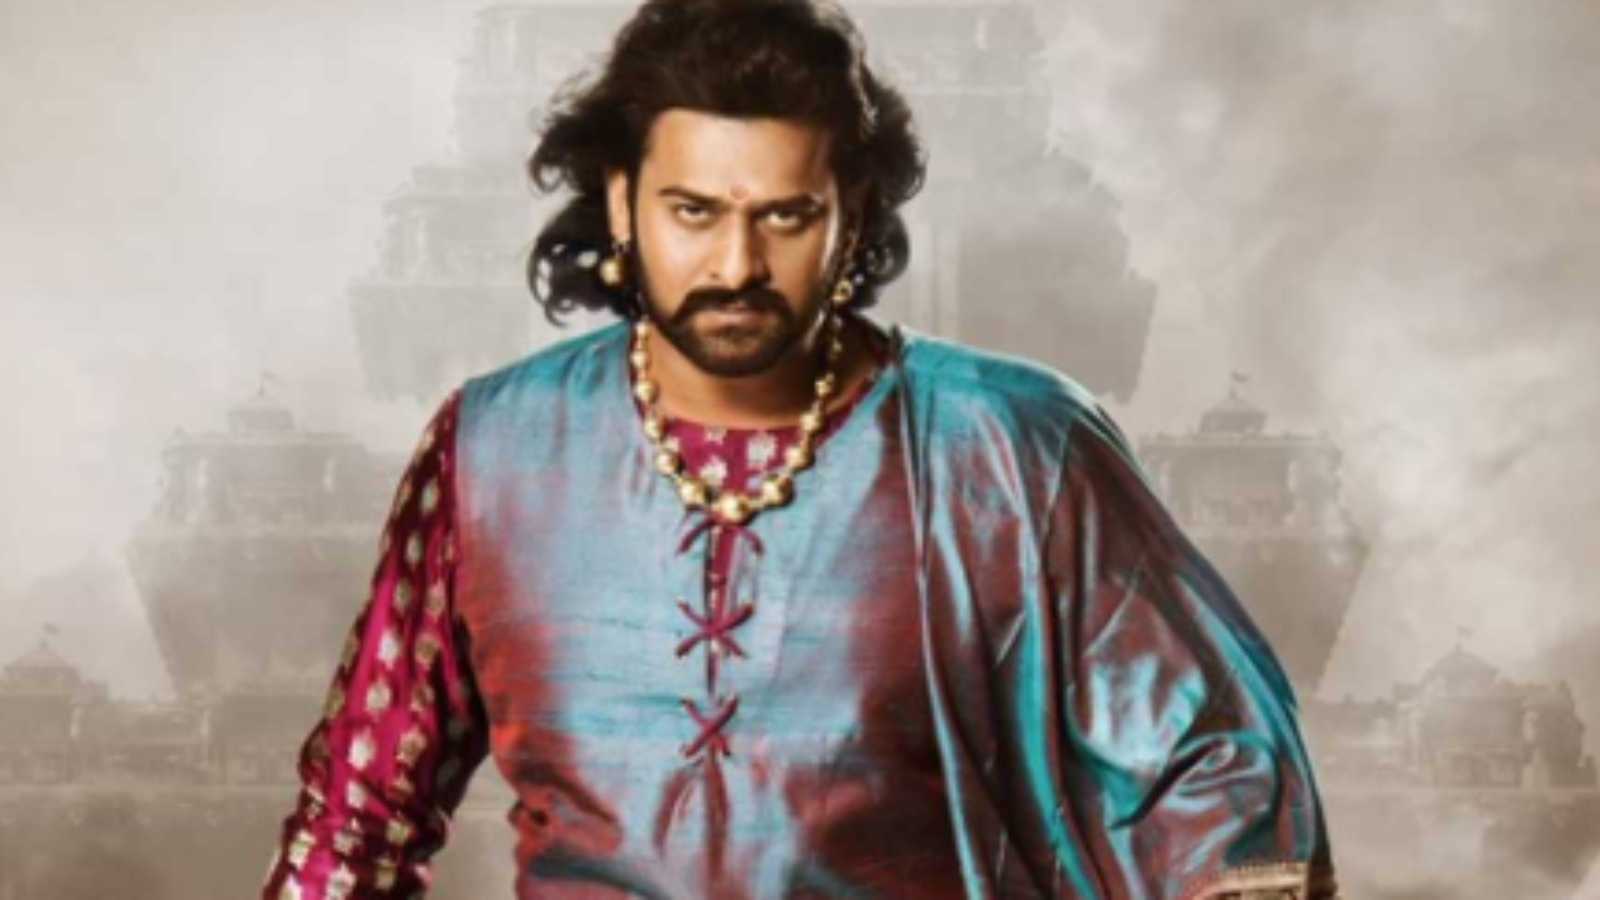 After Baahubali, these Prabhas starrers turned out to be massive flops despite huge expectations